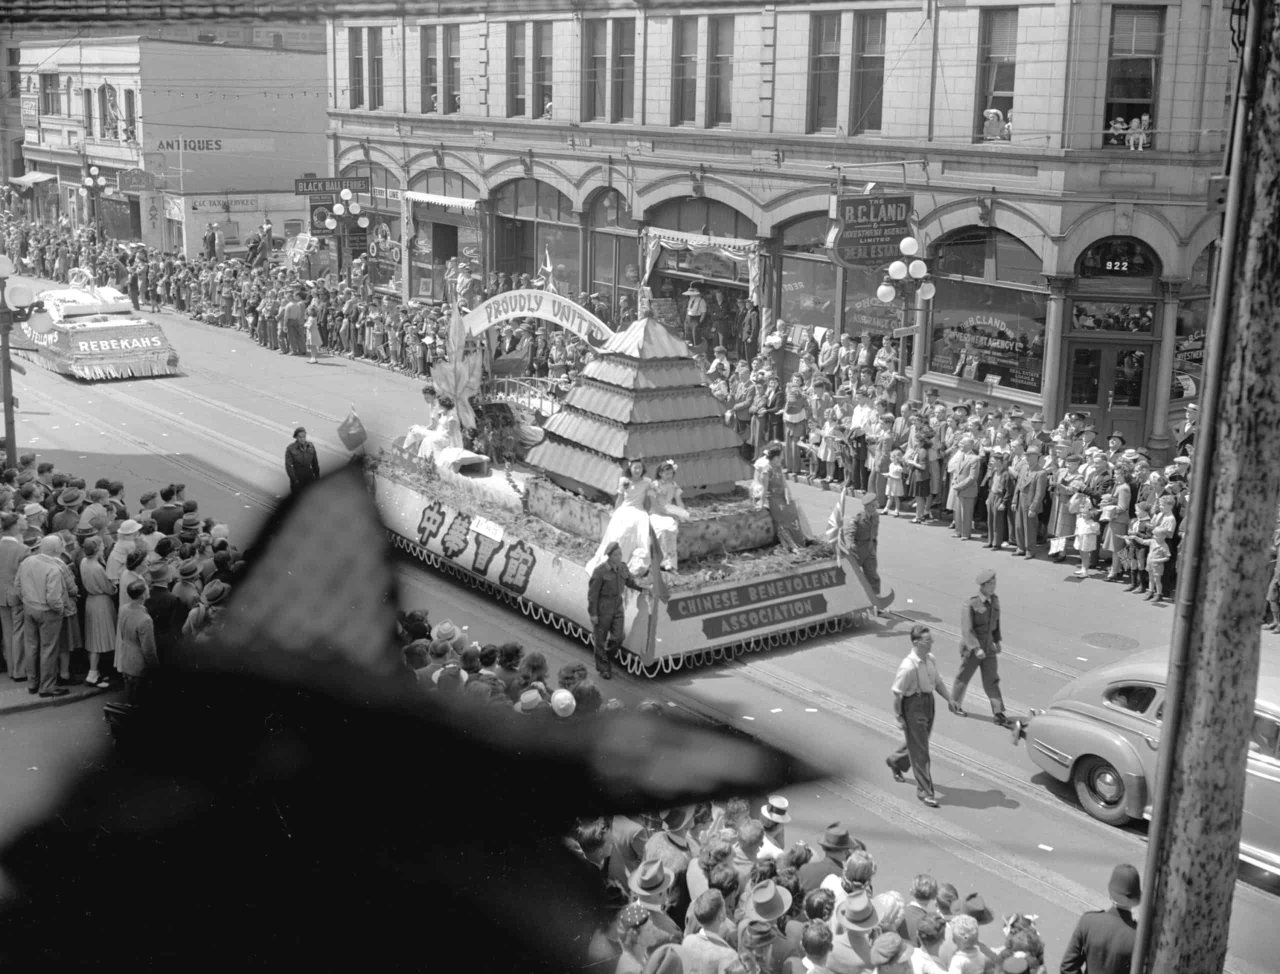 Chinese Benevolent Association float at the Empire Day Parade in 1946. Source: City of Vancouver Archives 586-4343.